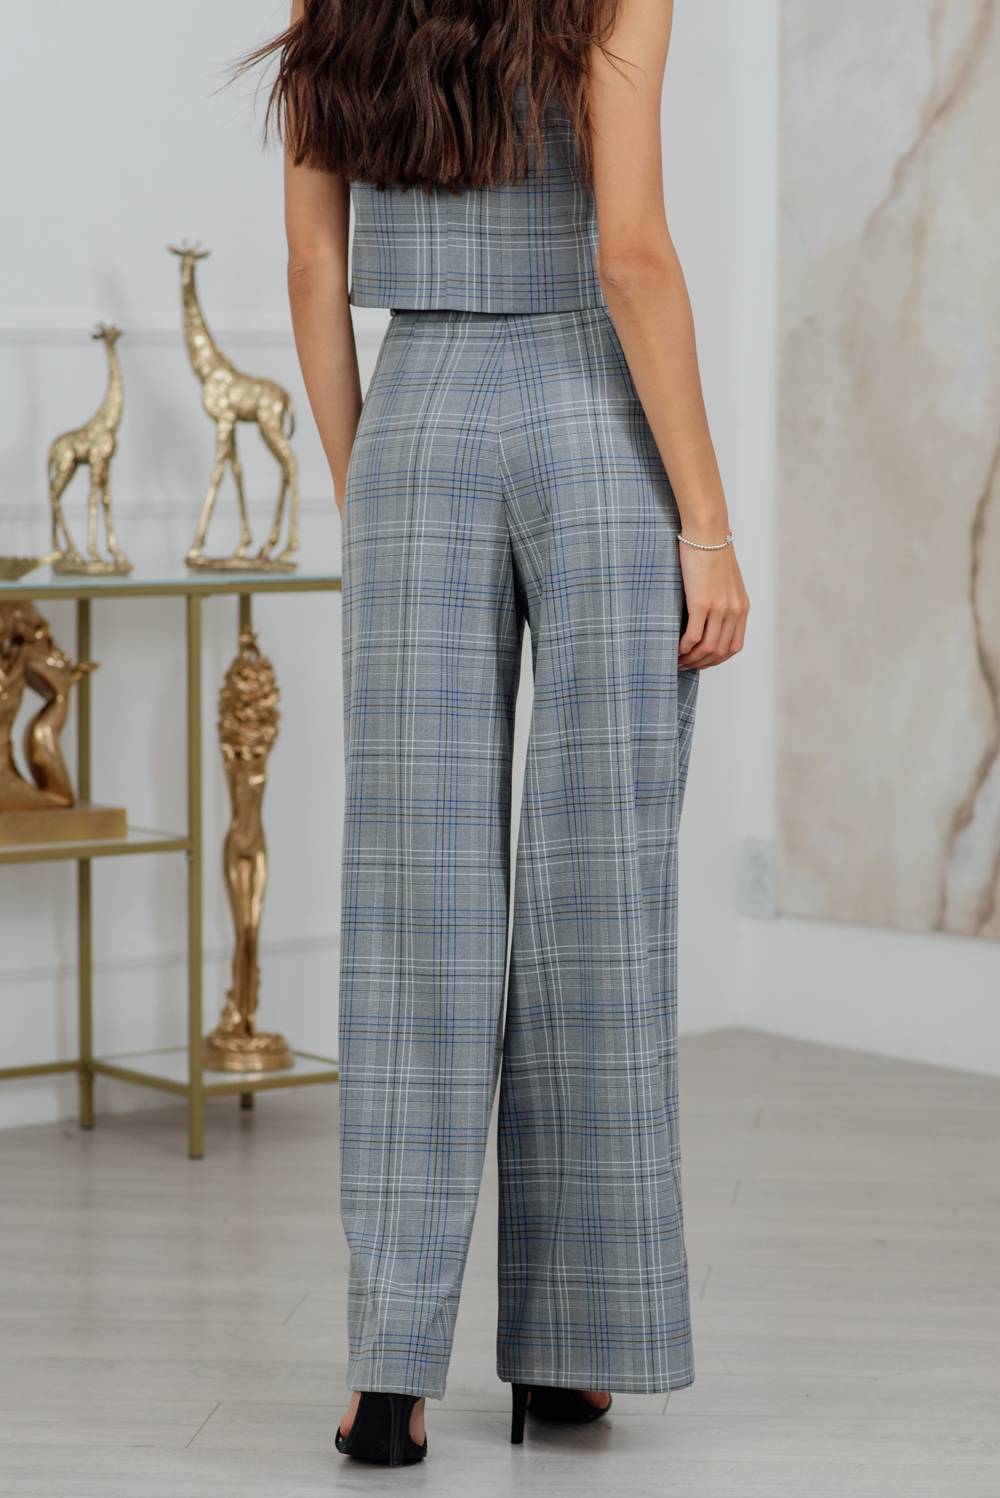 Gray and blue check palazzo trousers